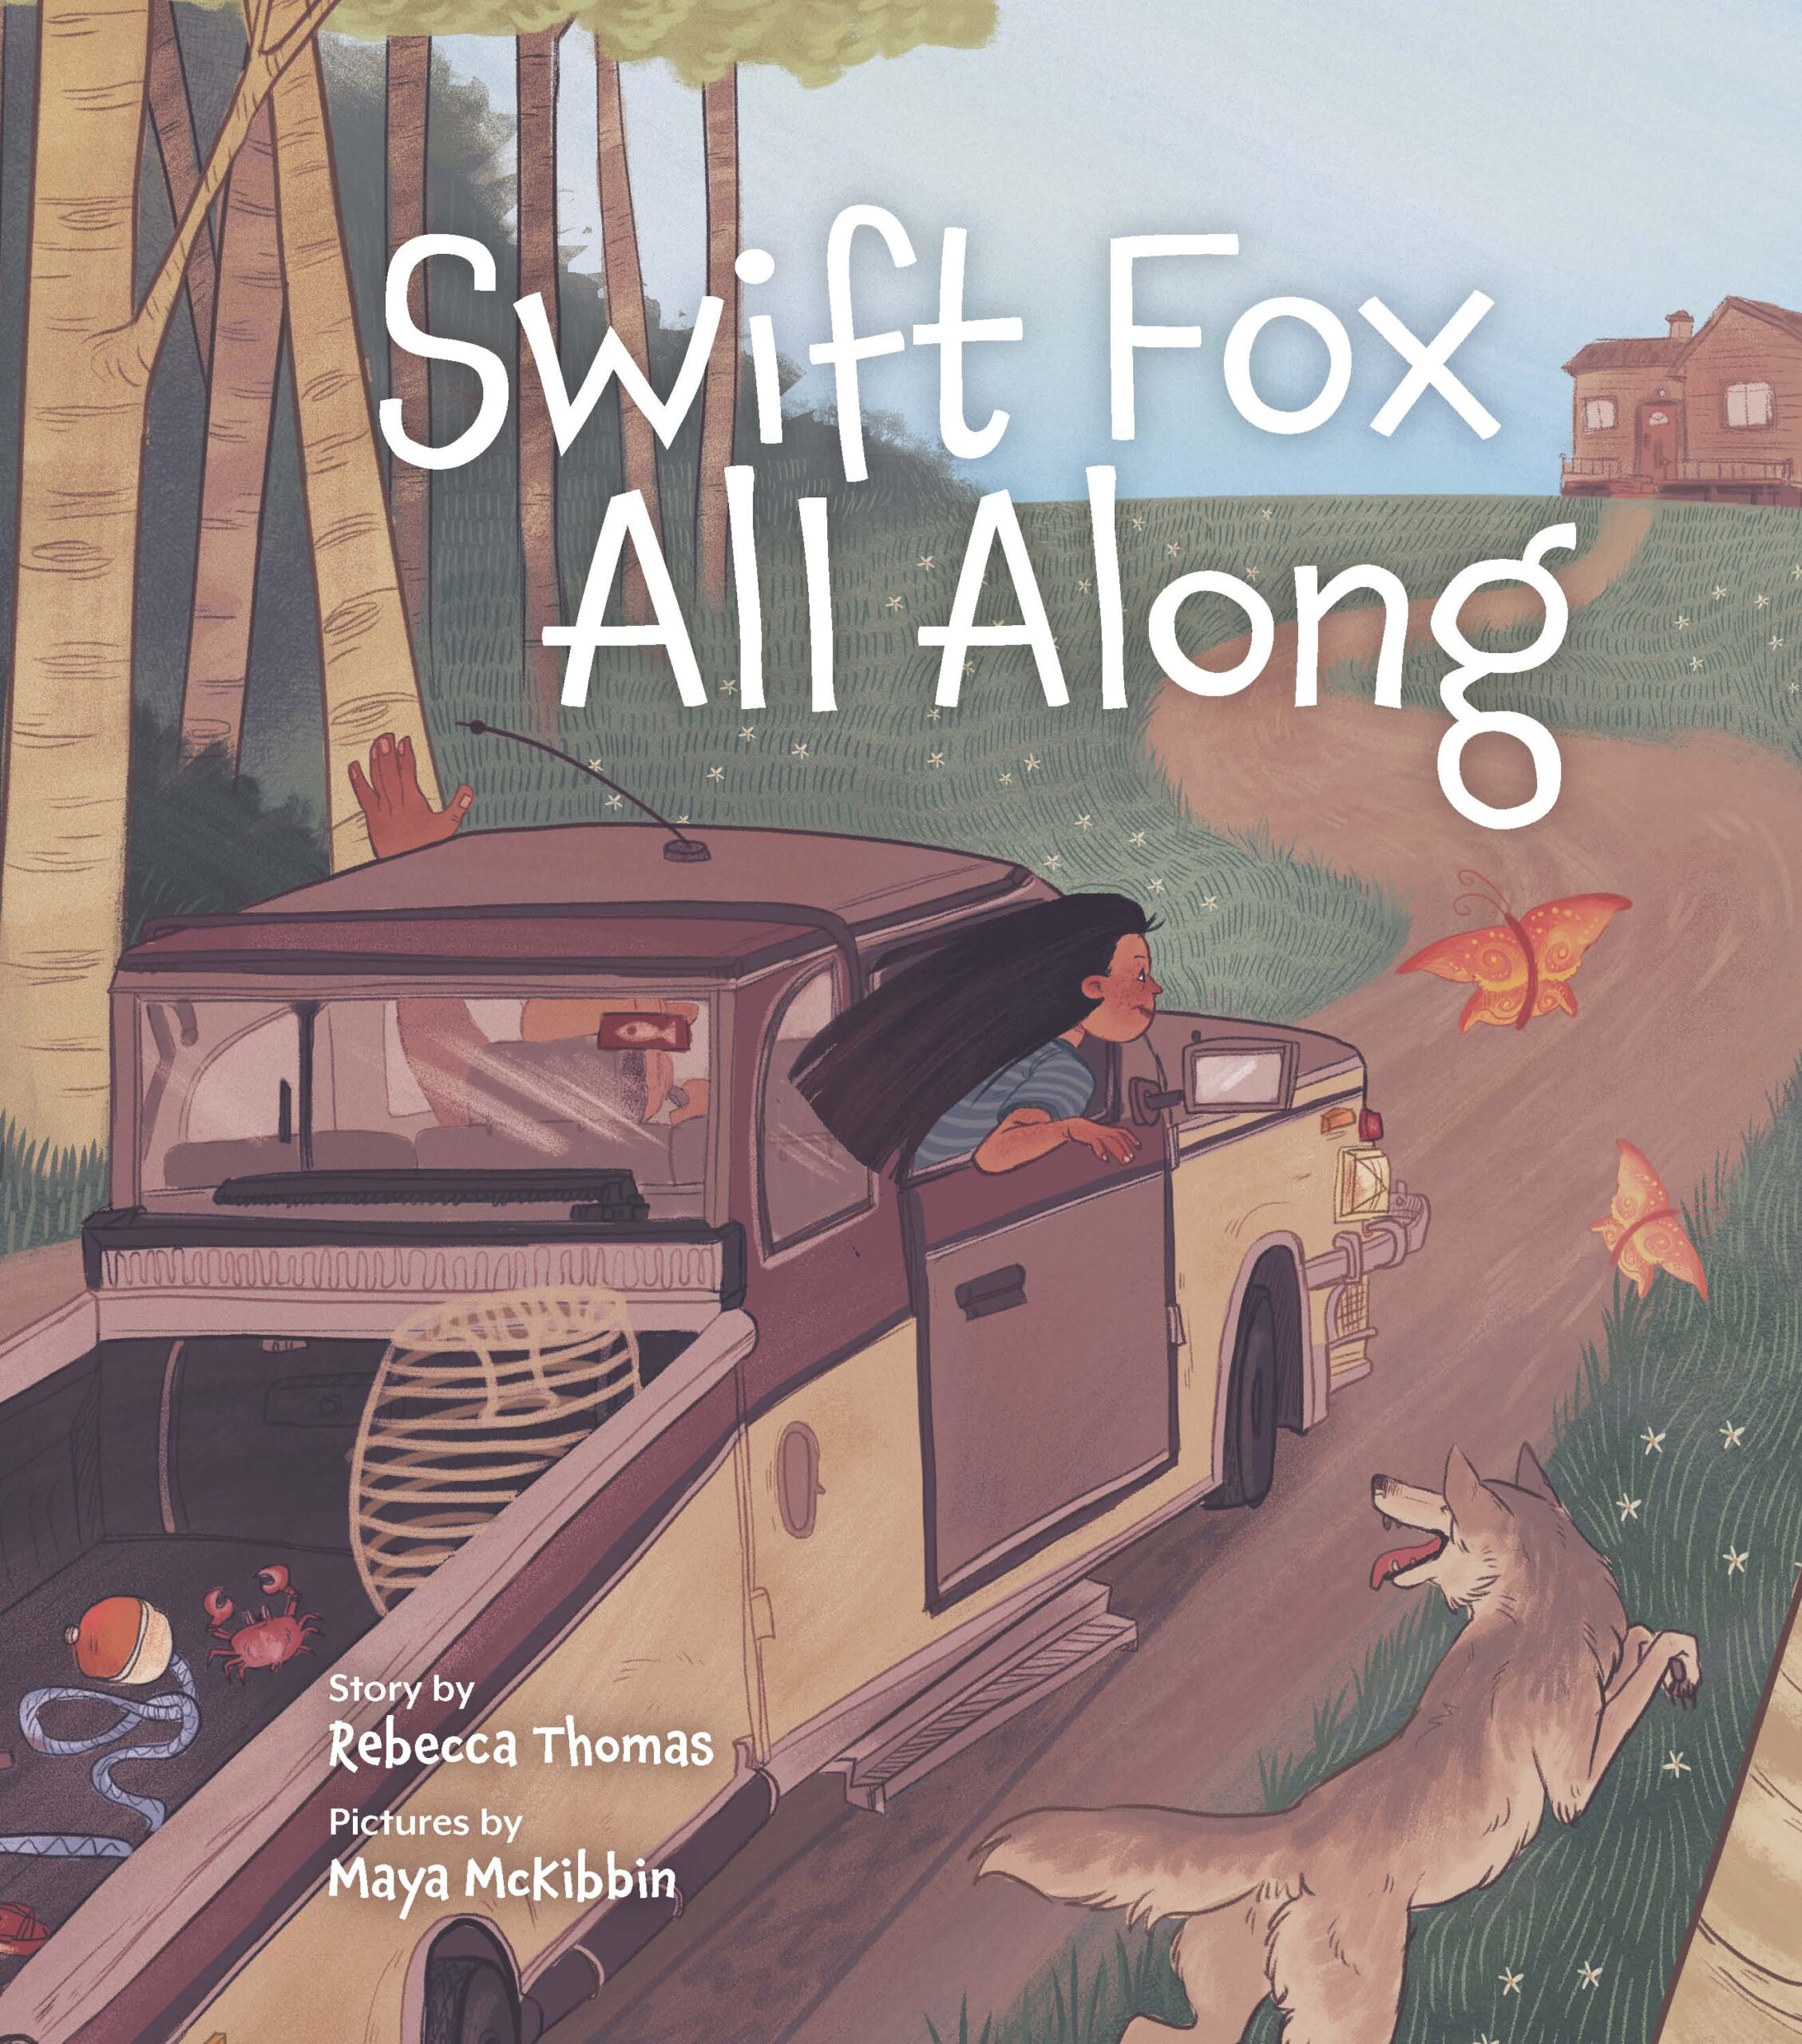 Swift Fox All Along by Rebecca Thomas book cover